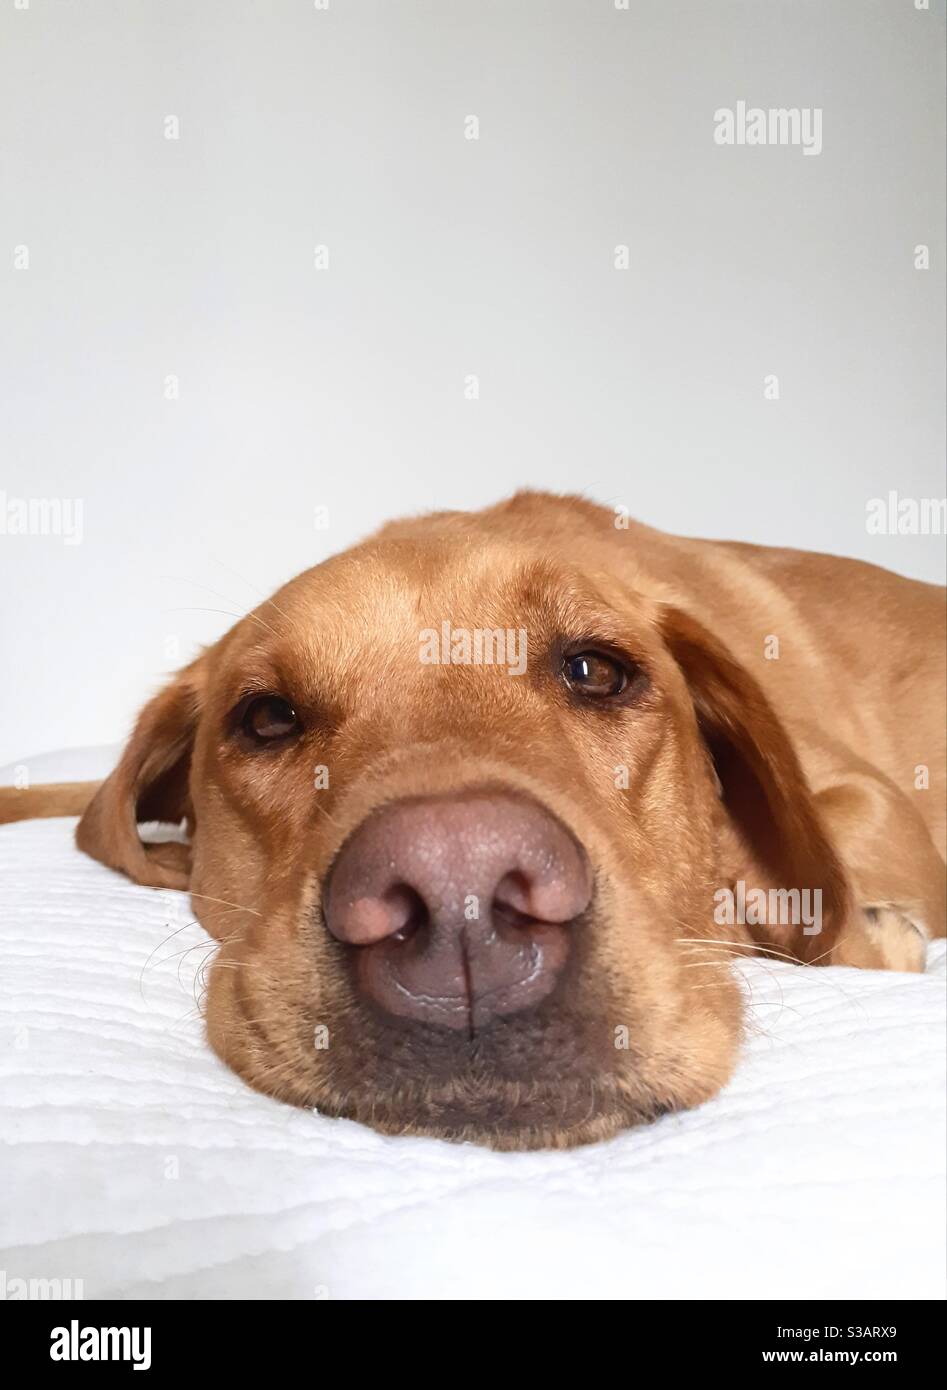 Close up portrait of the long snout and nose of a lazy Labrador retriever dog with copy space Stock Photo